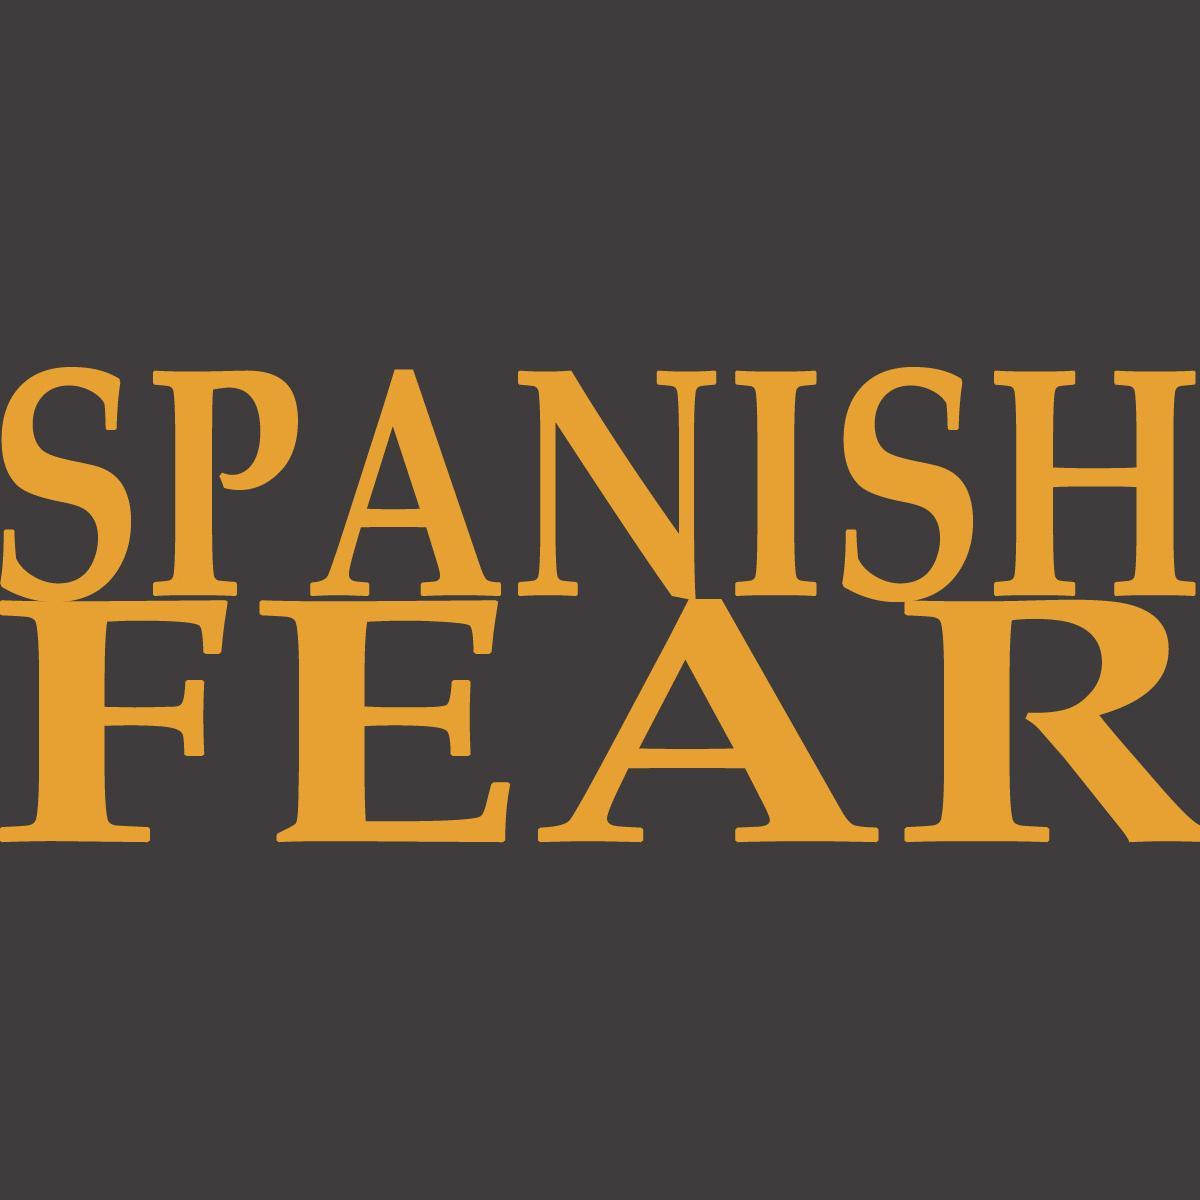 Website on Spanish Horror latest news, reviews, features, shorts and  Horror Rises from Spain podcast promoter.